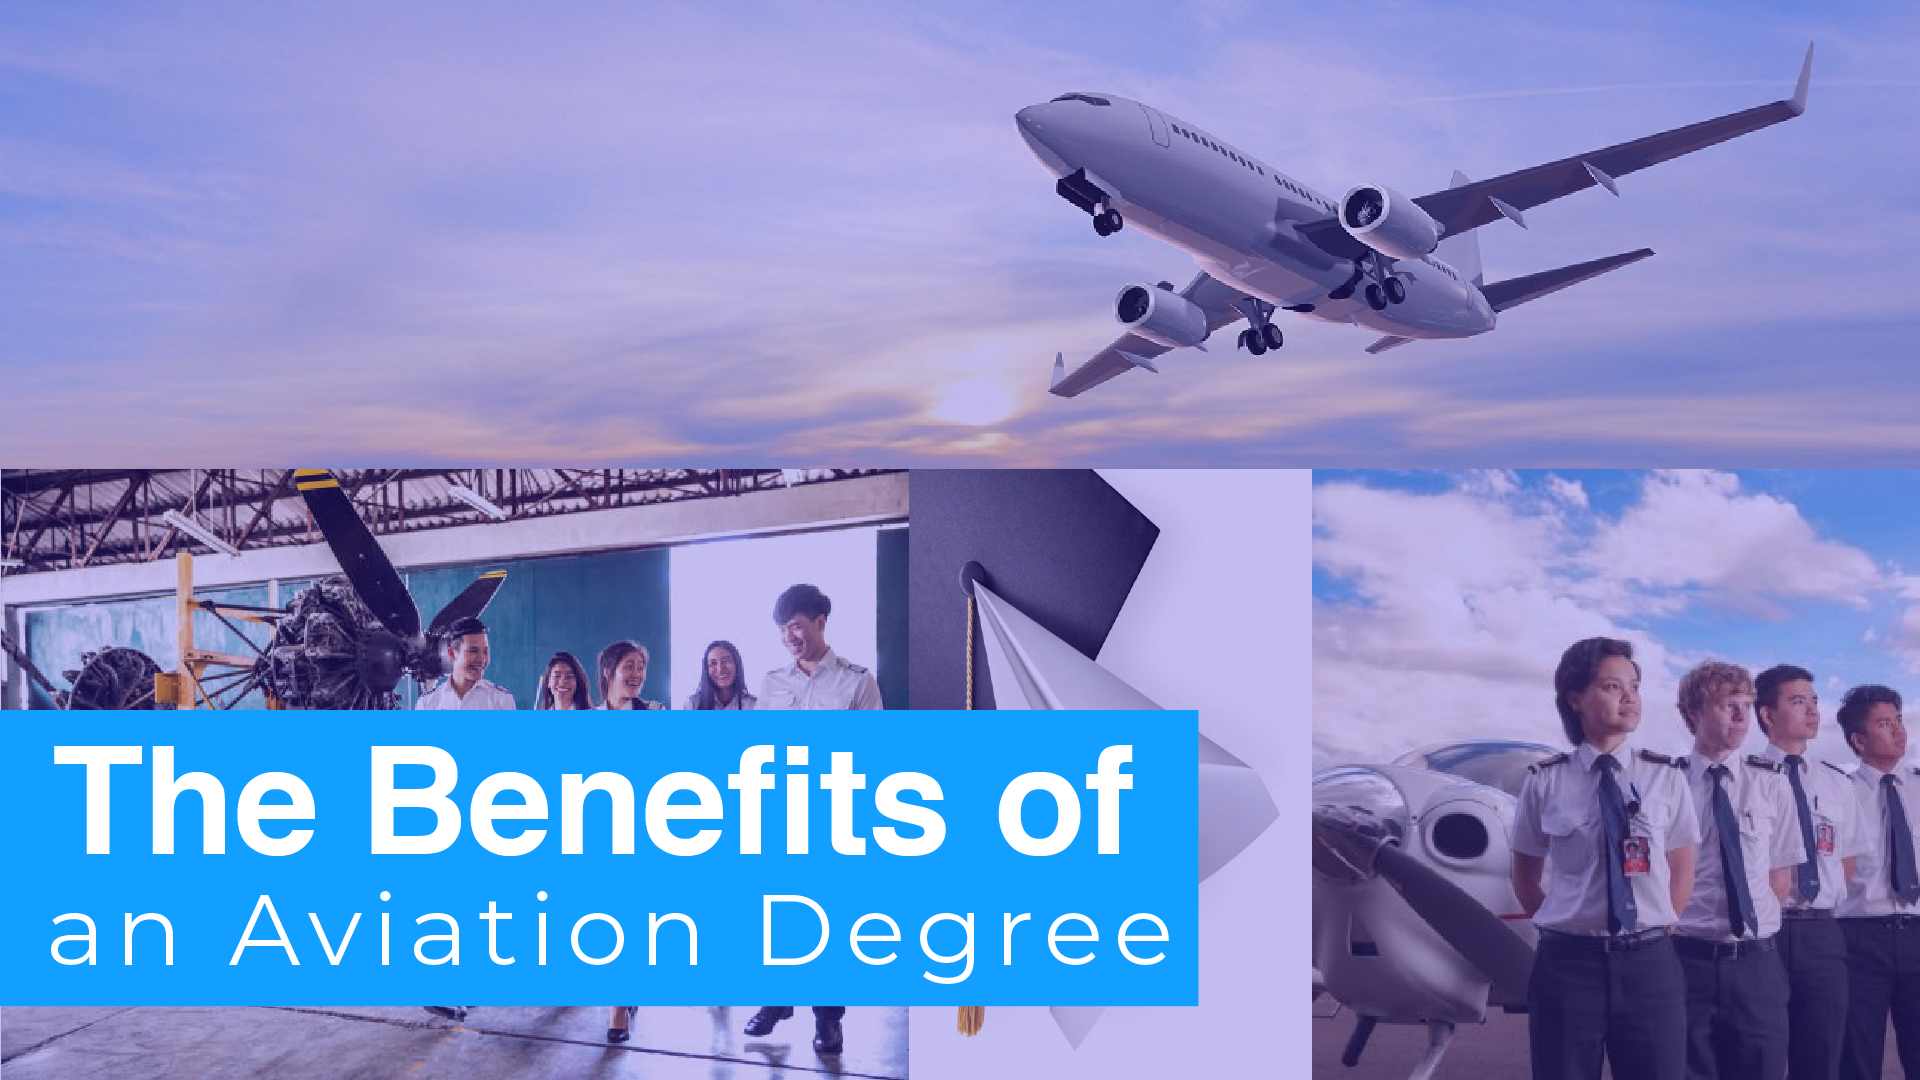 The Benefits of an Aviation Degree